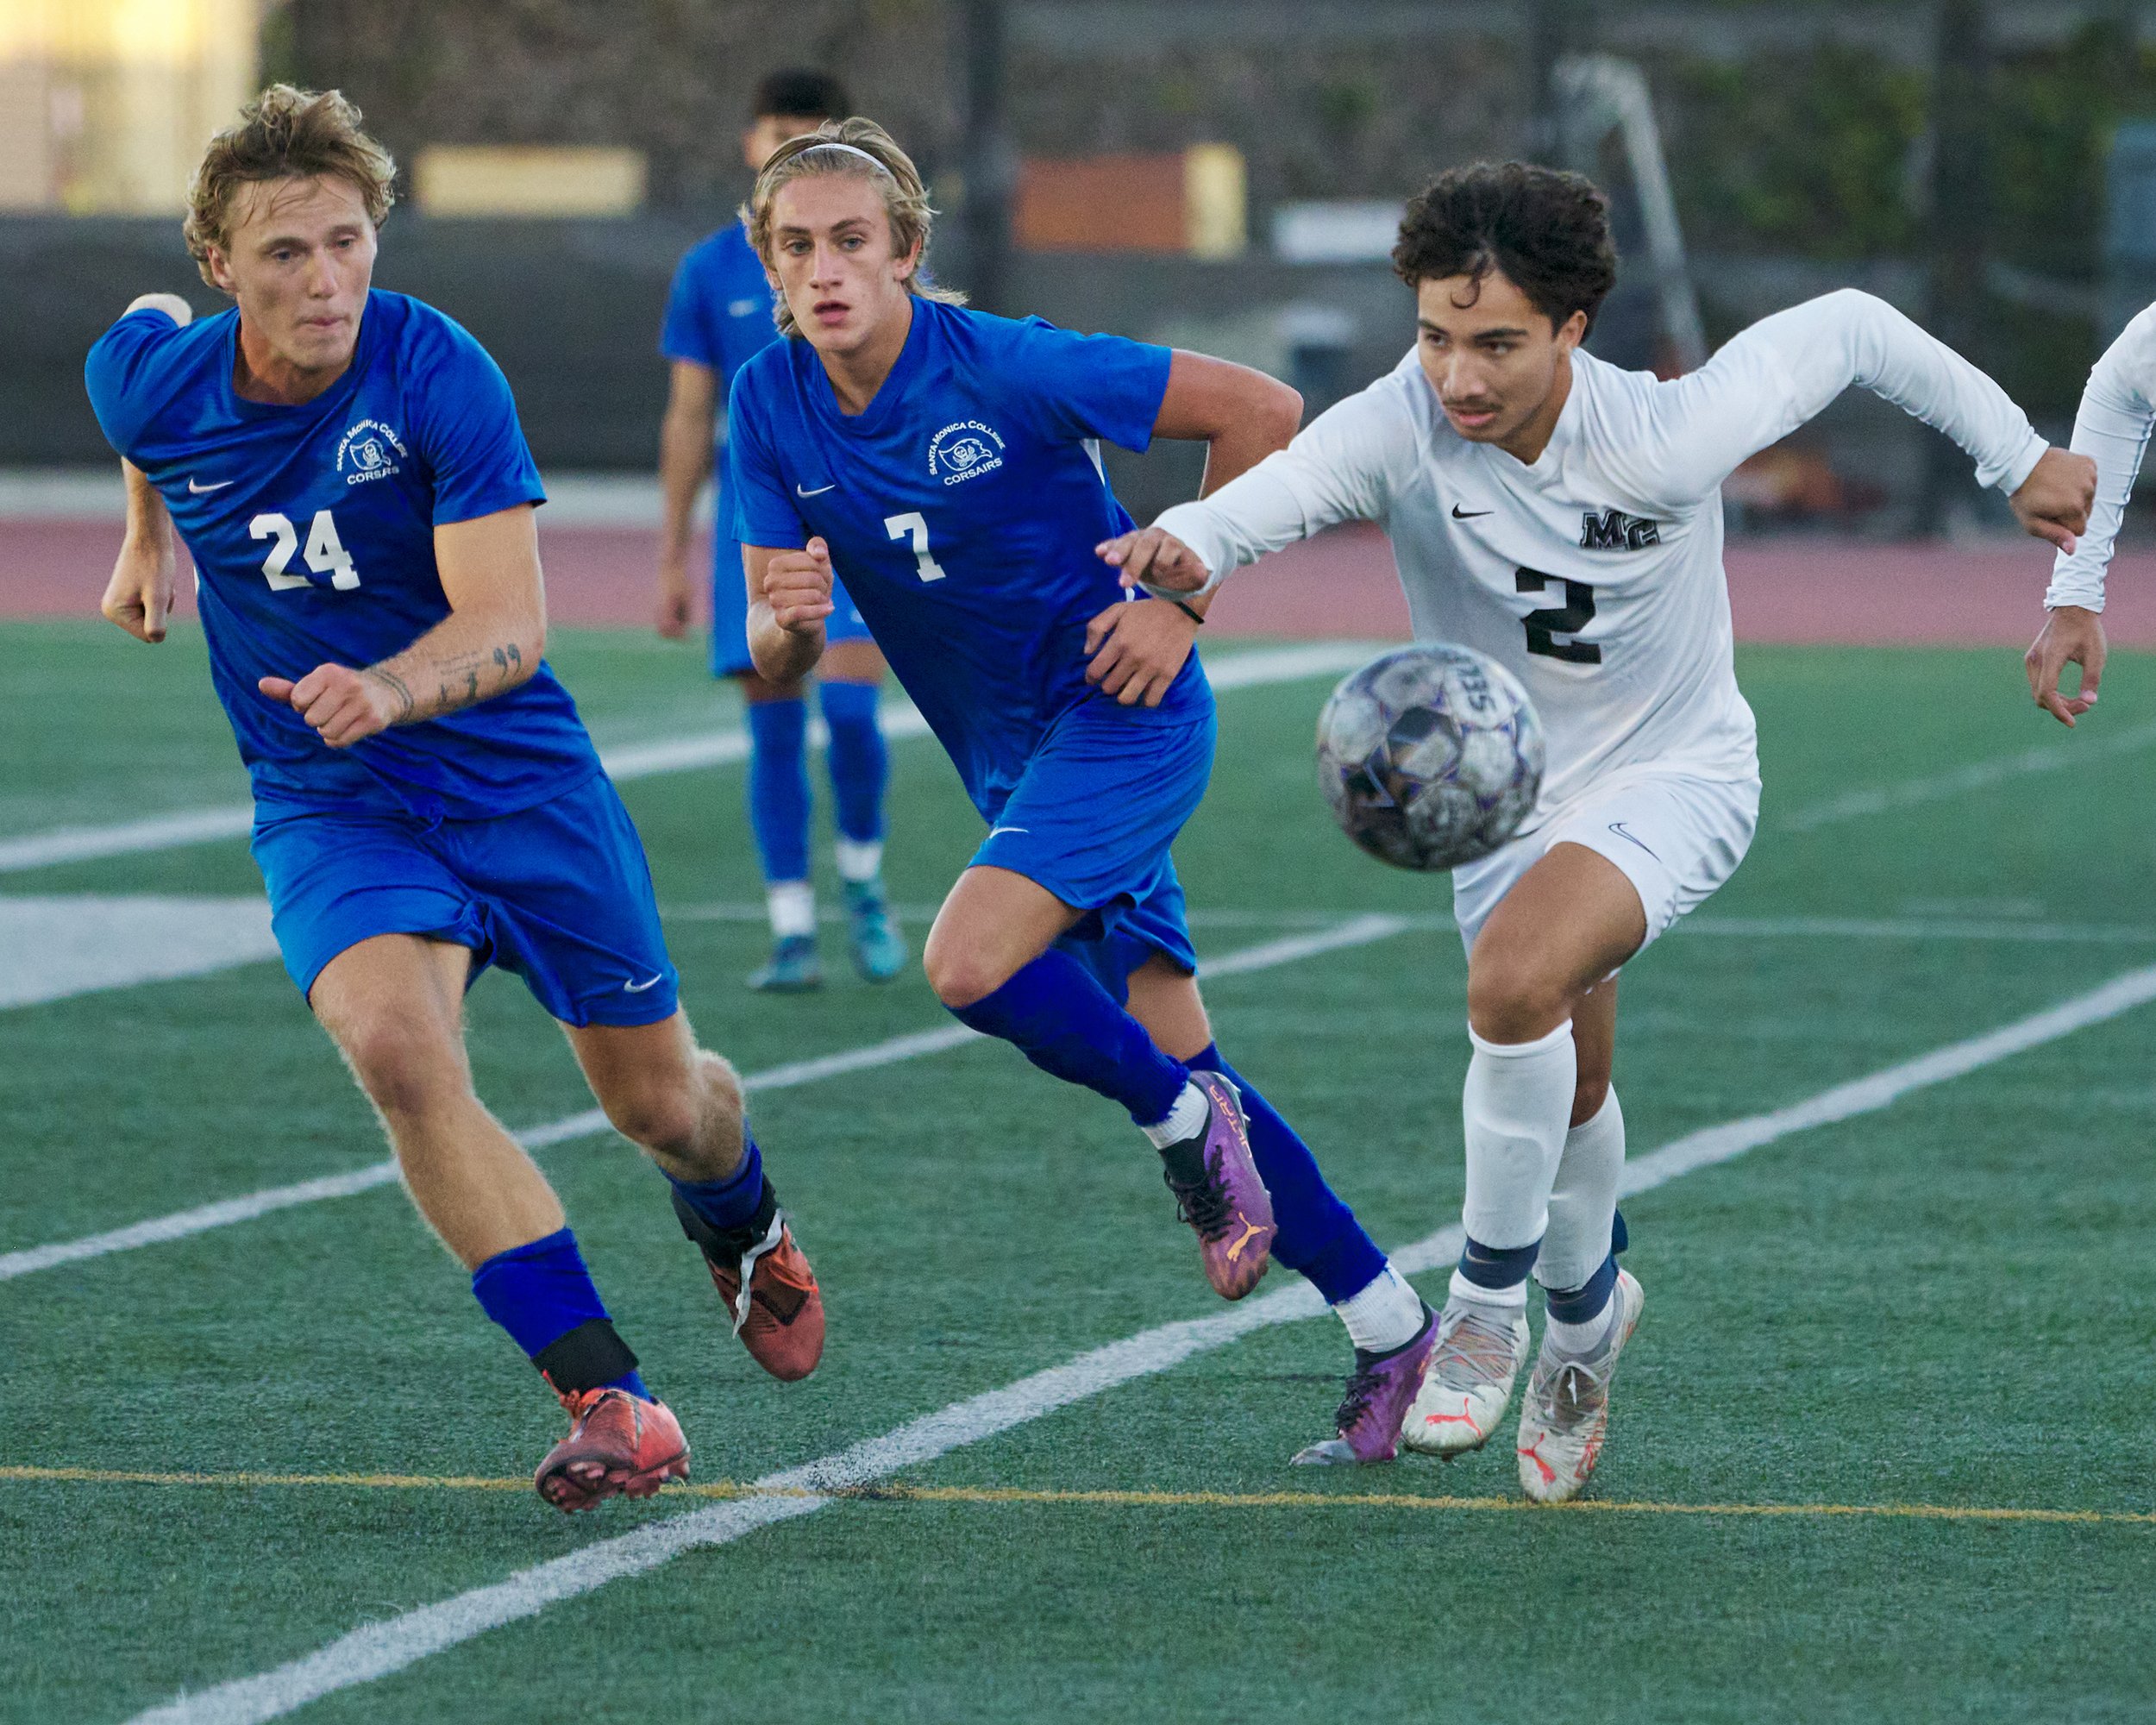  Santa Monica College Corsairs' Alexander Lalor and Darren Lewis, and Moorpark College Raiders' Chris Aguilar during the men's soccer match on Tuesday, Oct. 25, 2022, at Corsair Field in Santa Monica, Calif. The Corsairs won 4-0. (Nicholas McCall | T